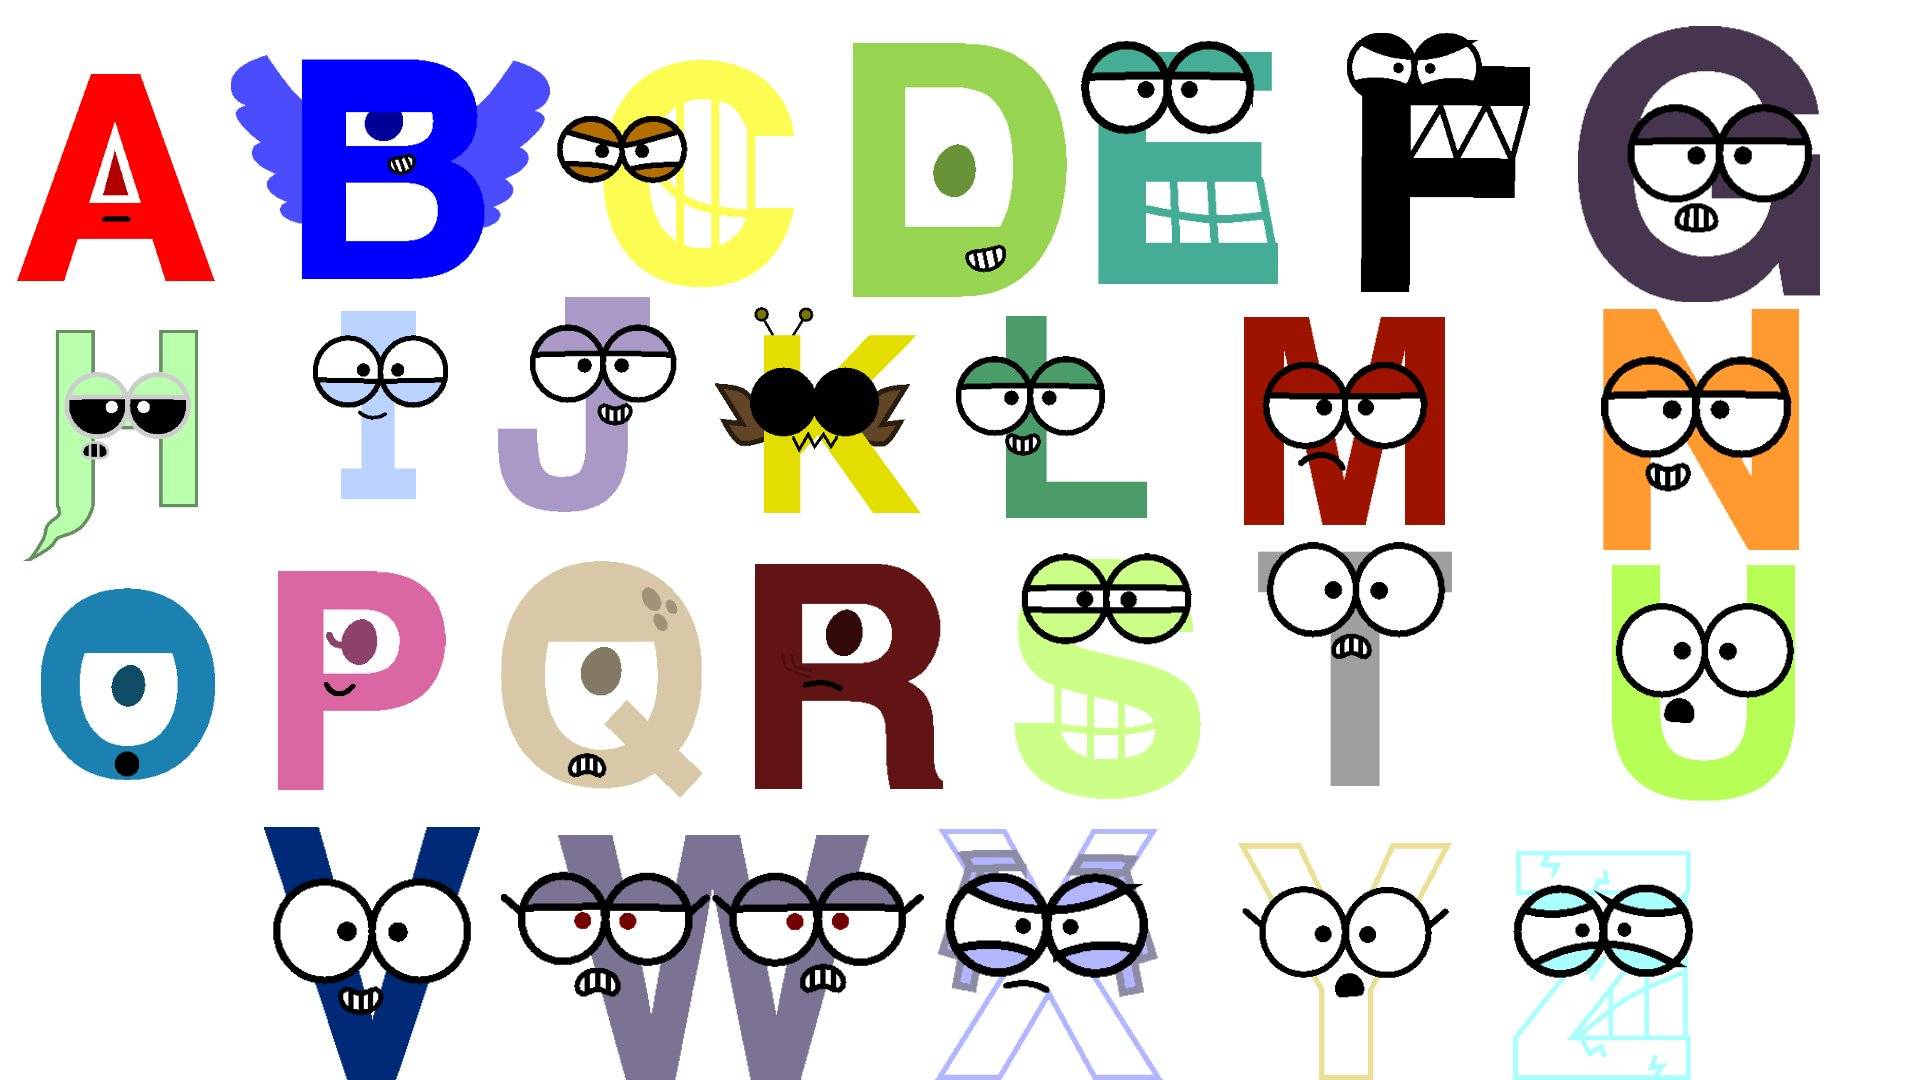 The TVOKids Letters See Alphabet Lore Planet Z? by TheBobby65 on DeviantArt